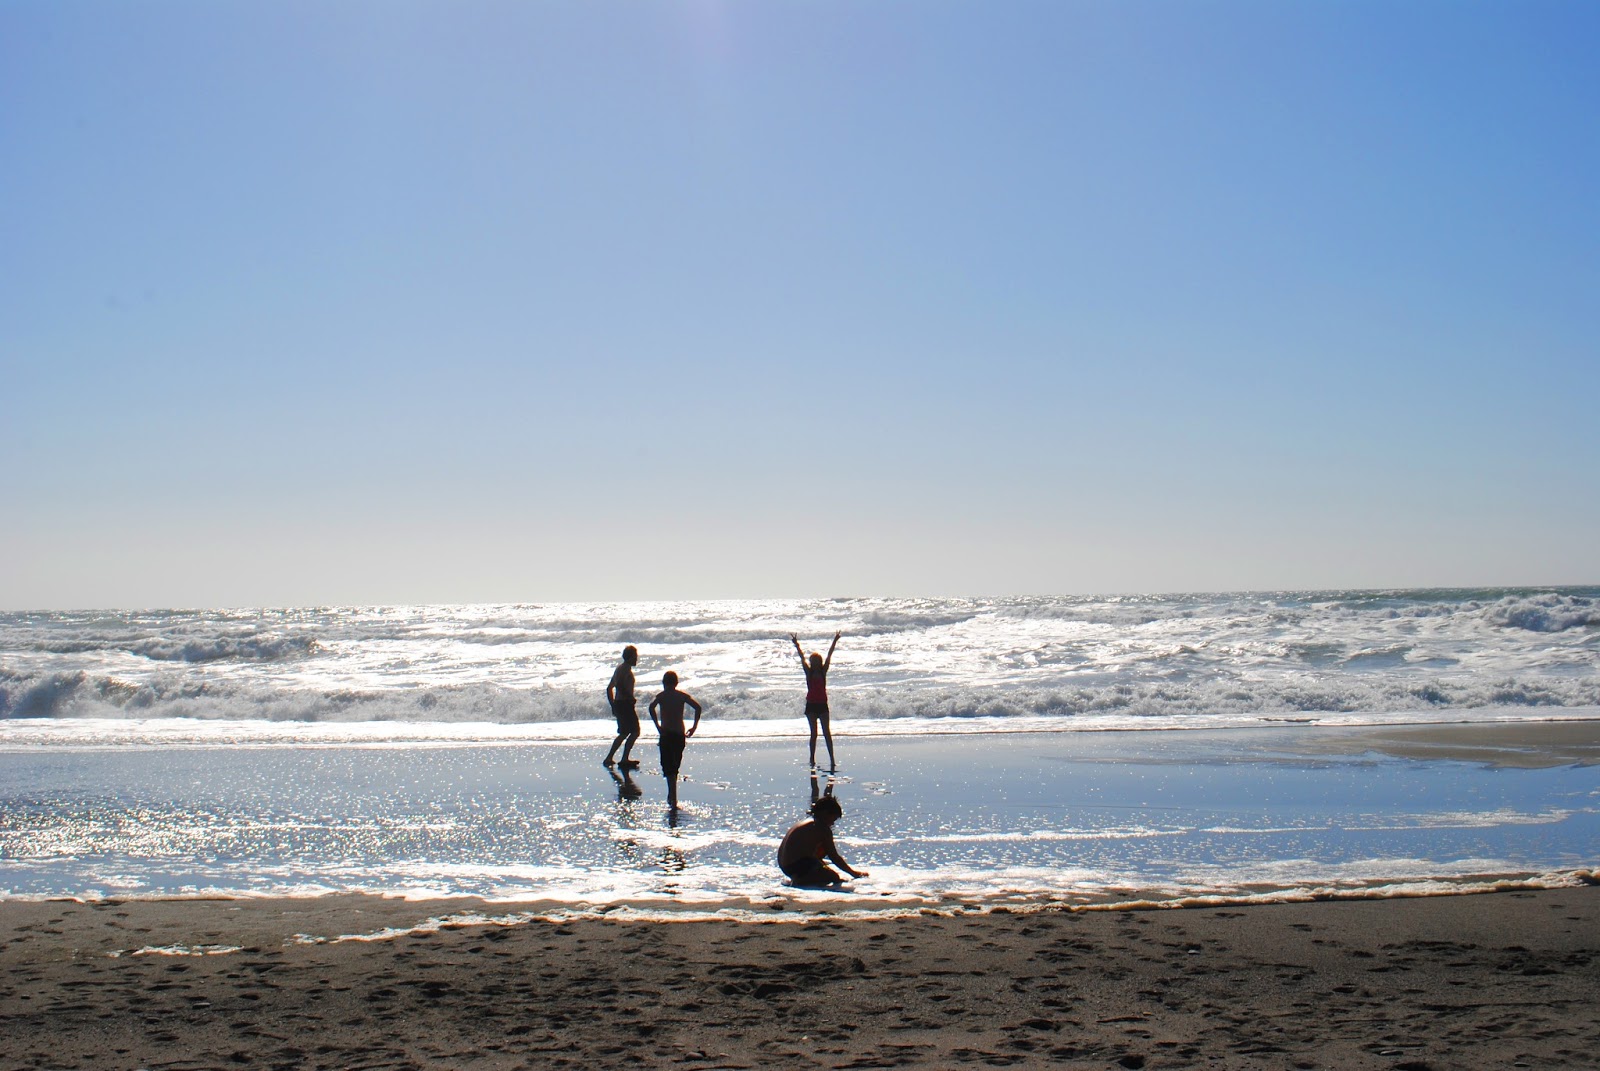 GOLD BLUFFS BEACH - What to do in Southern Oregon - Things to do - Norhtern California - Camping - Day TRip - Kid-Friendly - Beaches